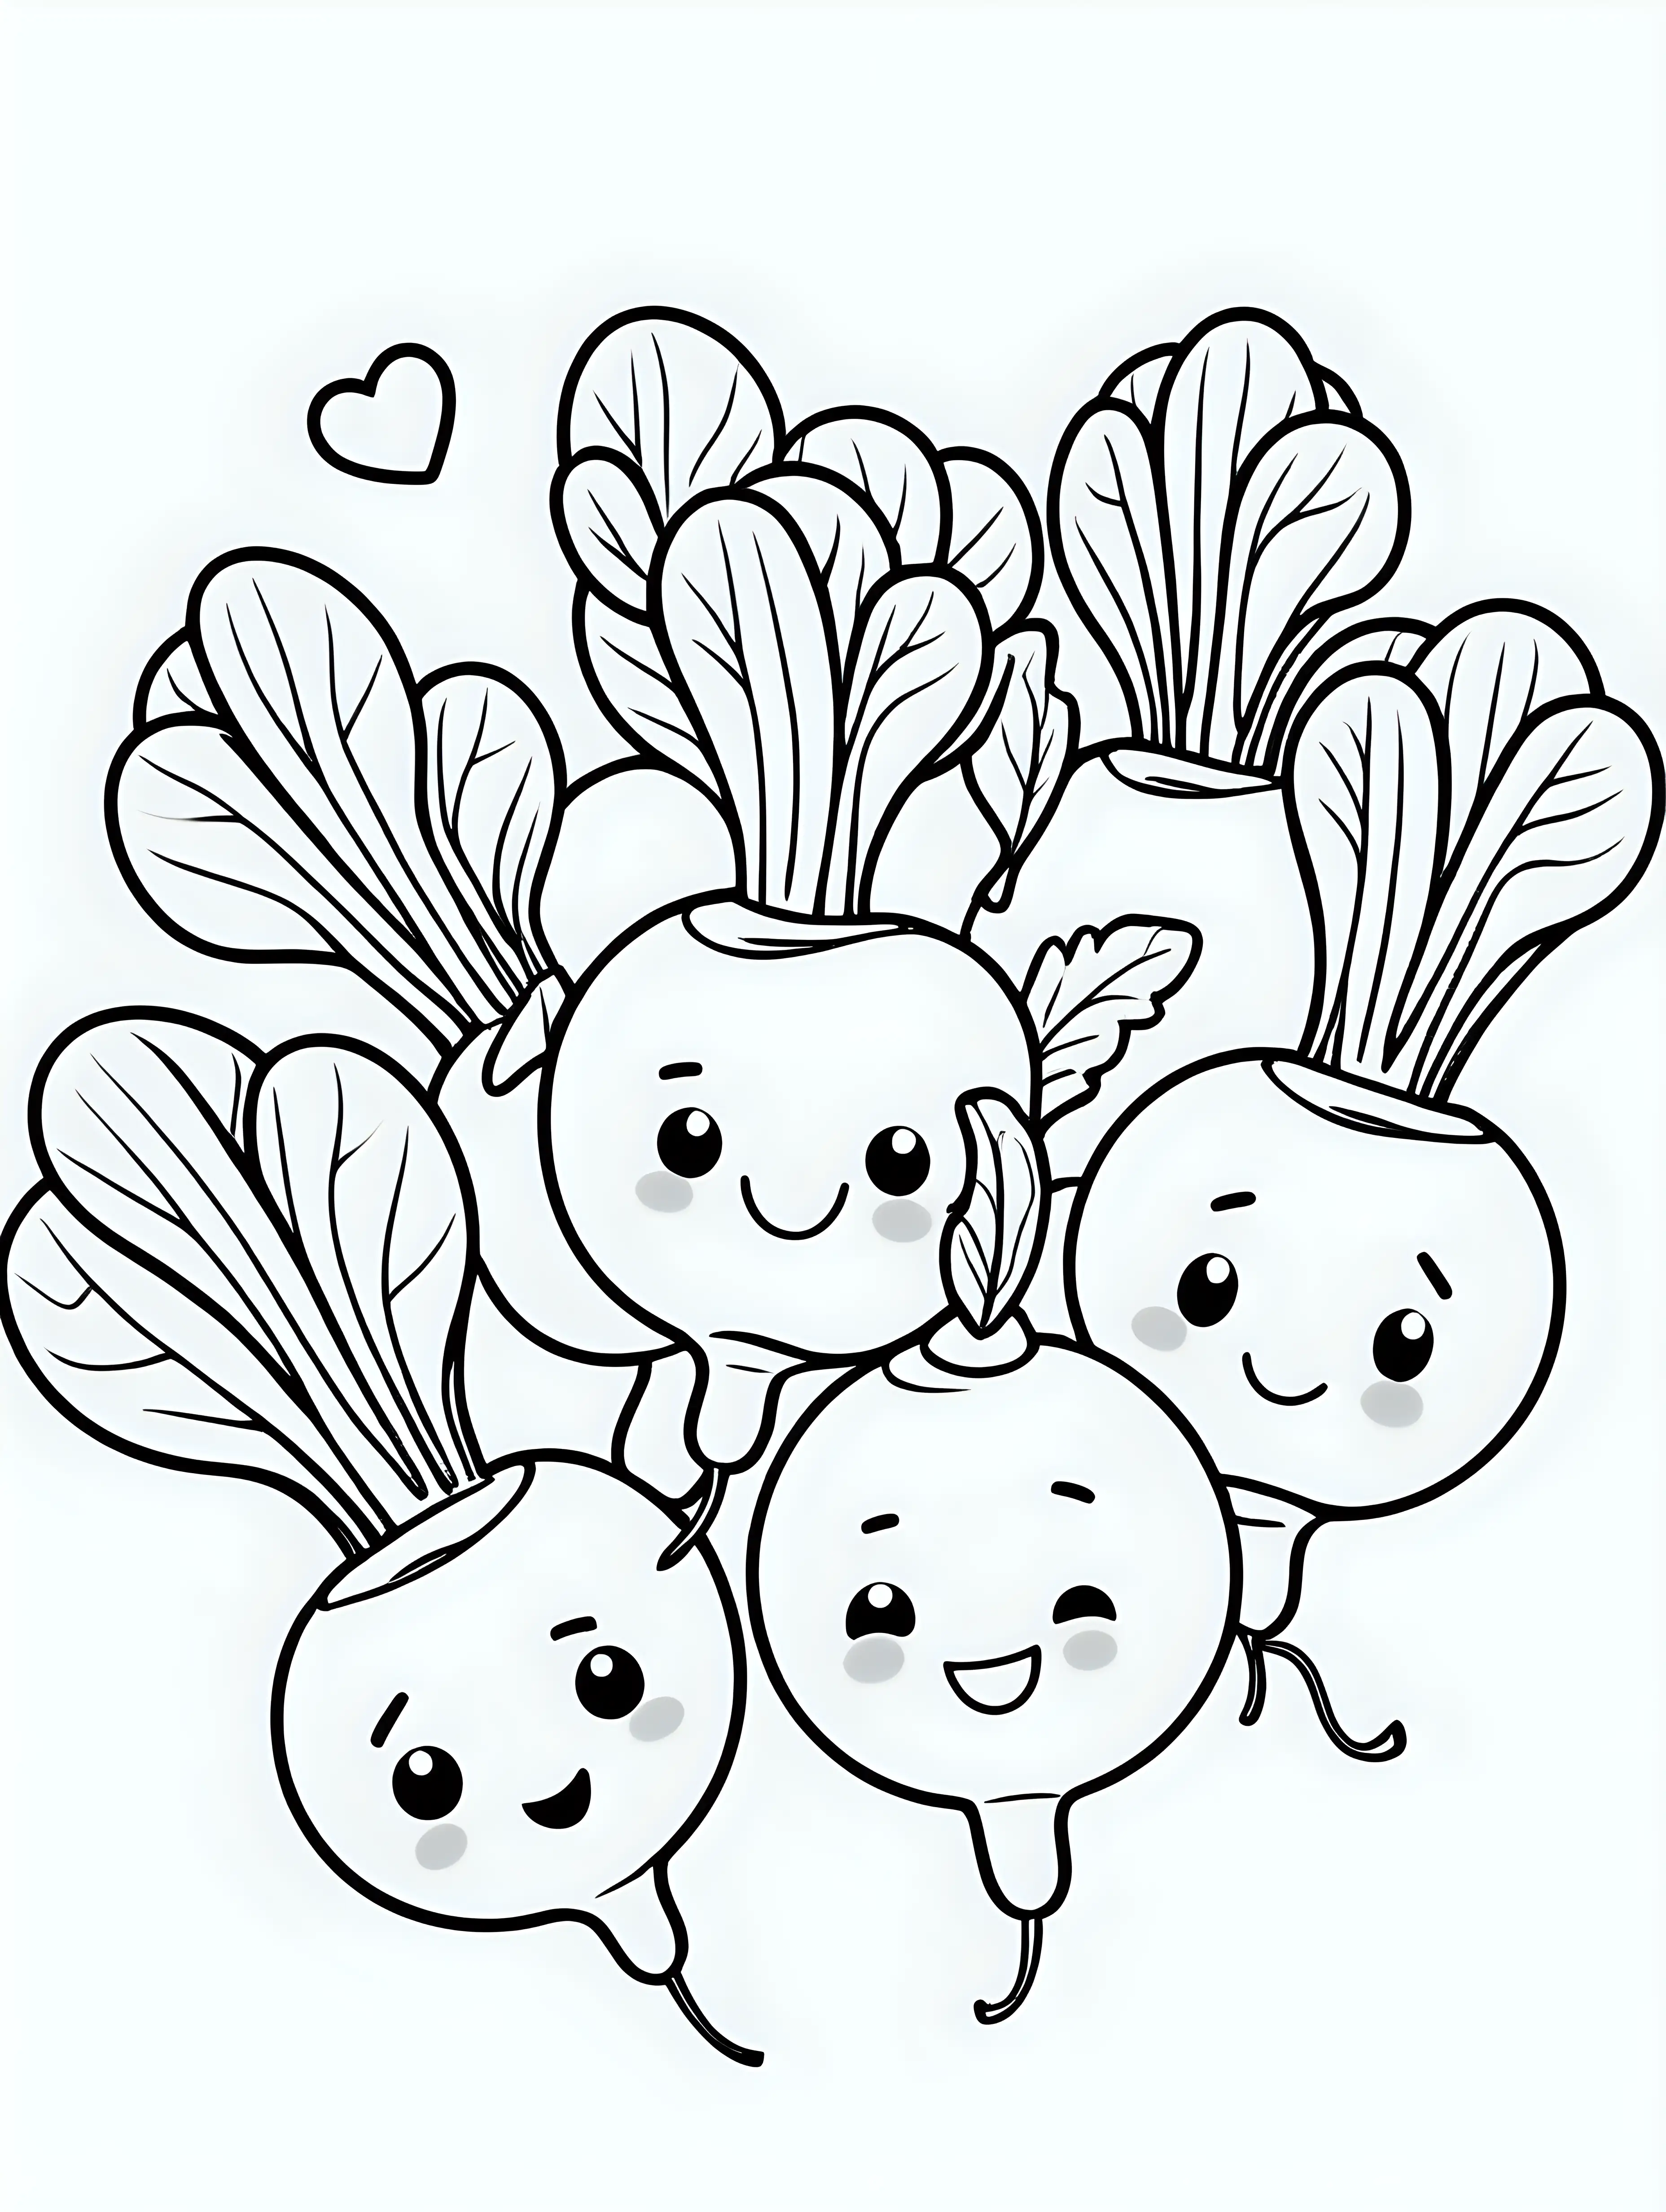 coloring book, cartoon drawing, clean black and white, single line, white background, cute radishes, emojis